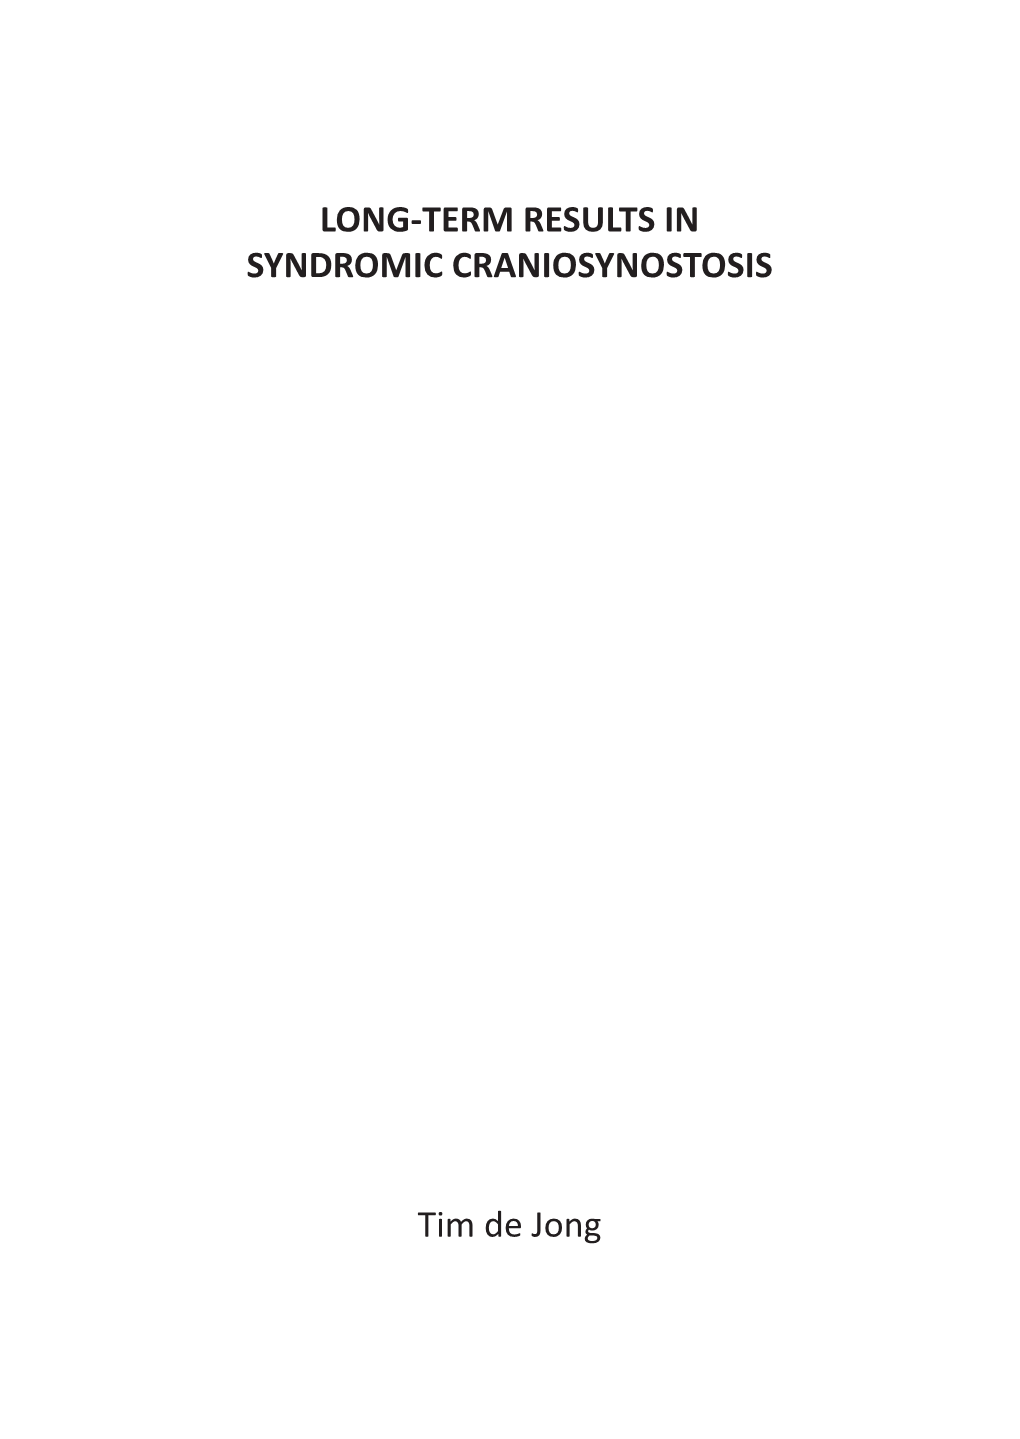 Long-Term Results in Syndromic Craniosynostosis